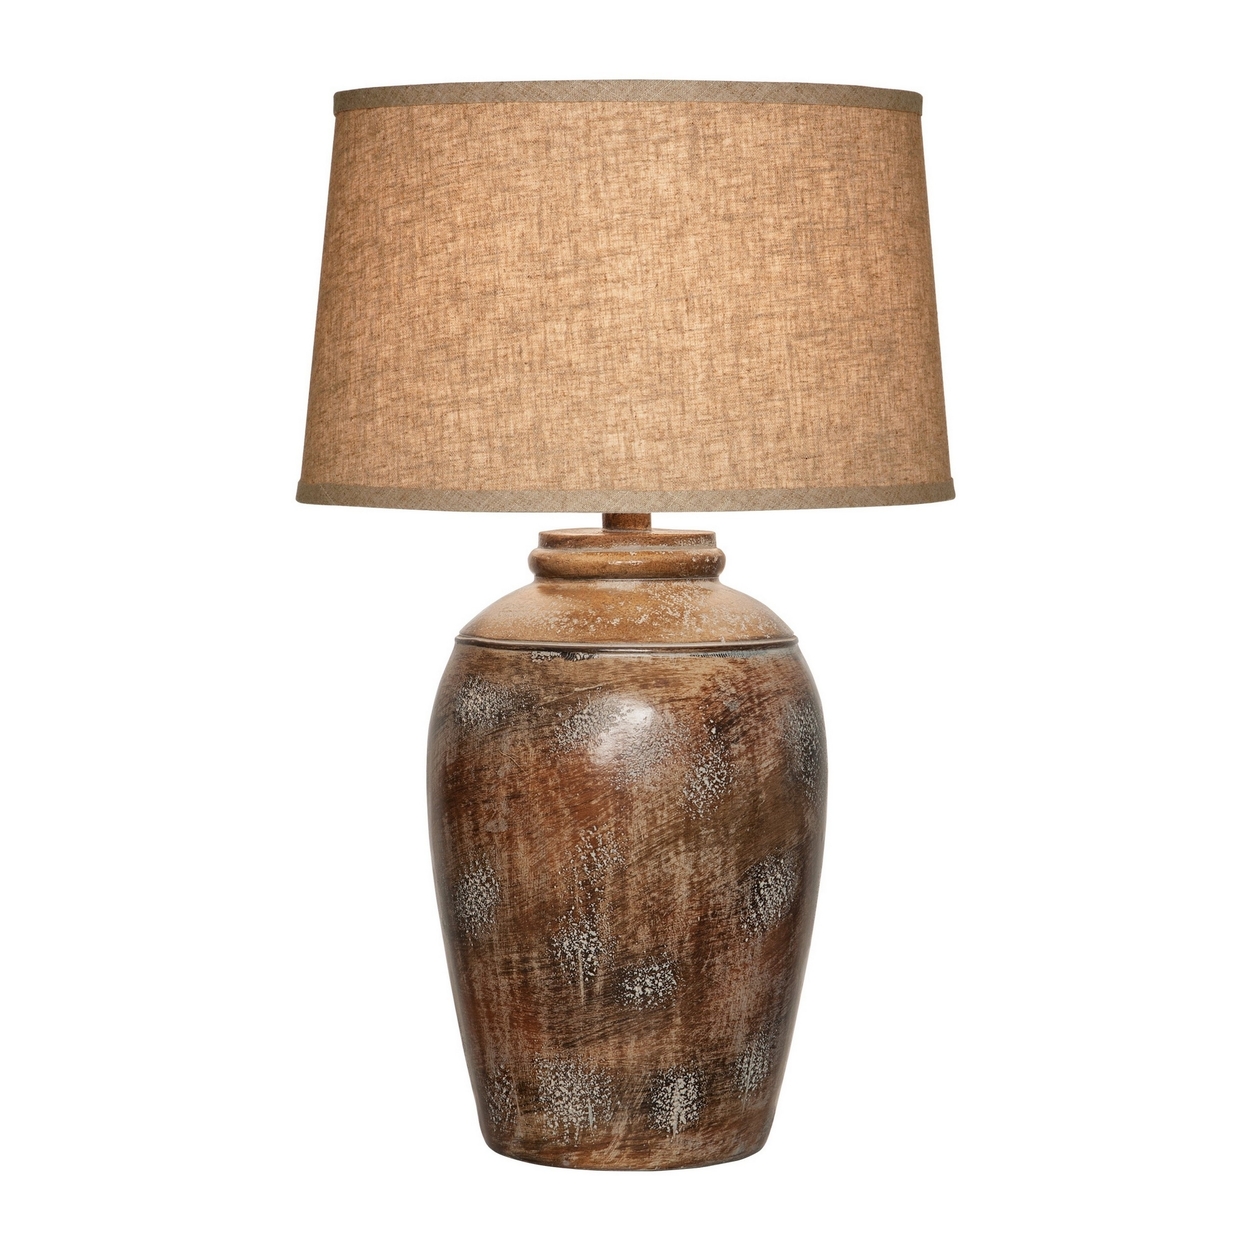 Aria 29 Inch Table Lamp, Curved Tall Base, Distressed Hydrocal, Brown- Saltoro Sherpi